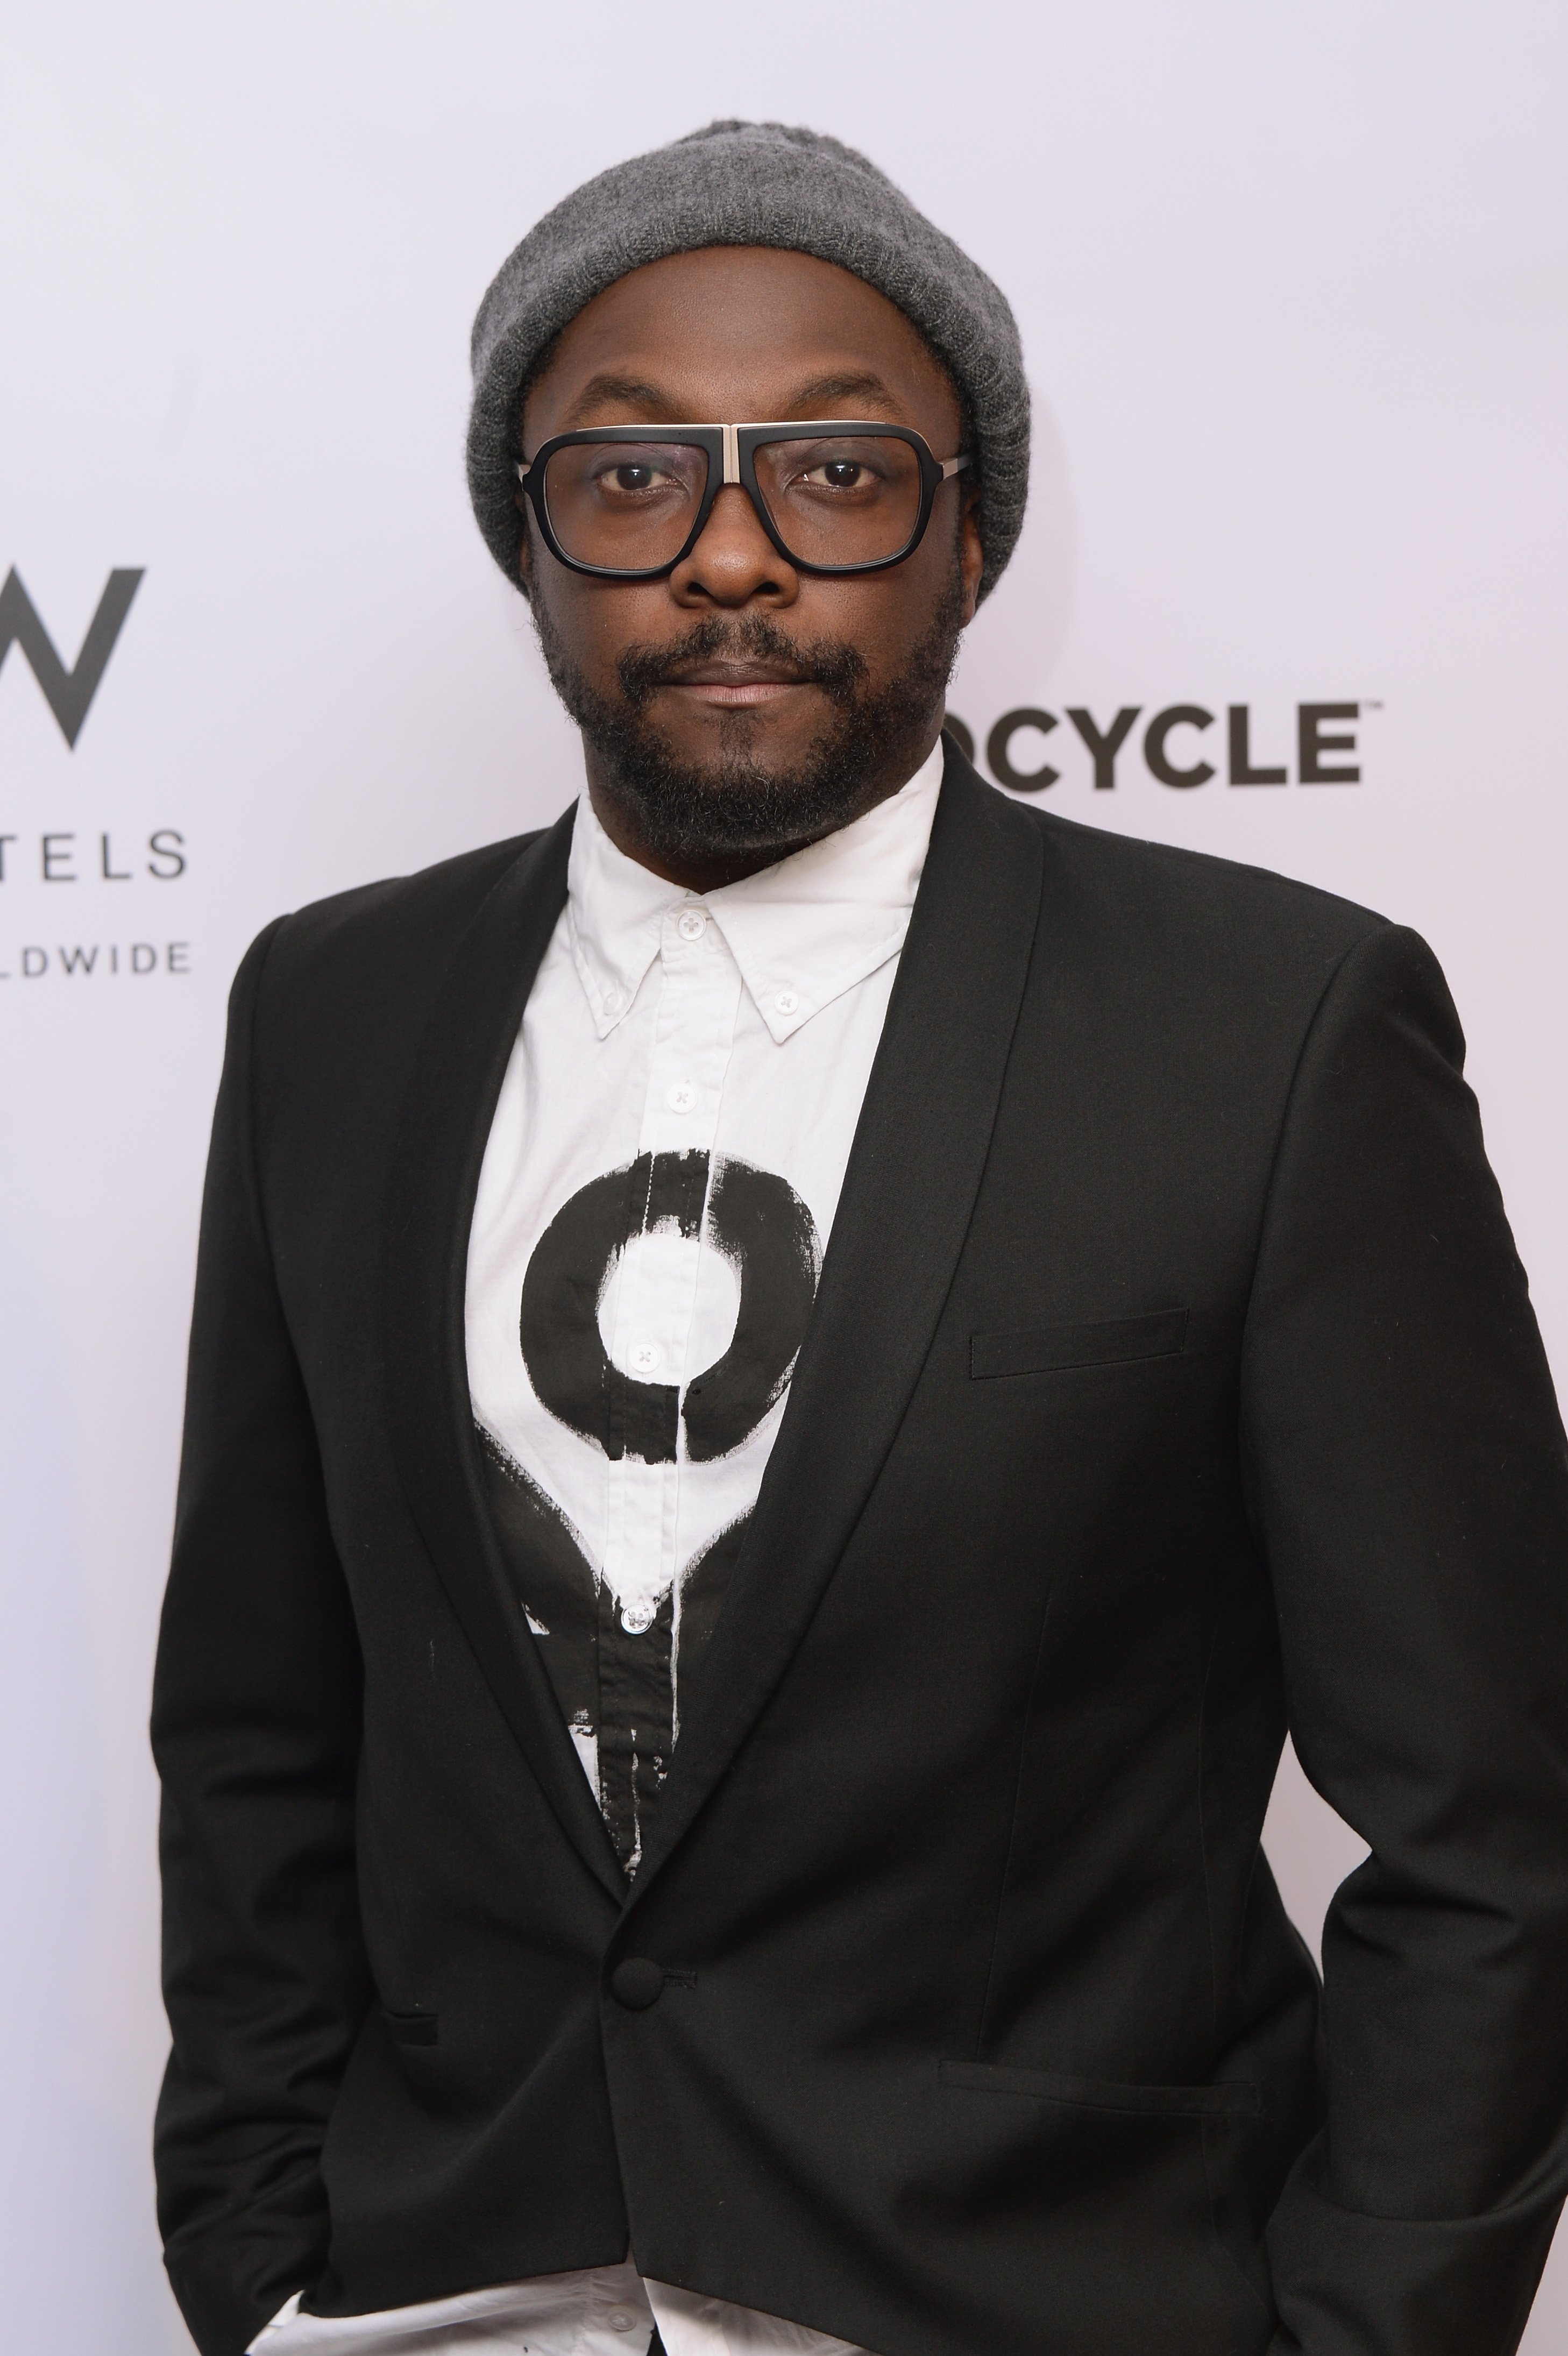 Will.i.am at a launch event in 2015. | Photo: Getty Images